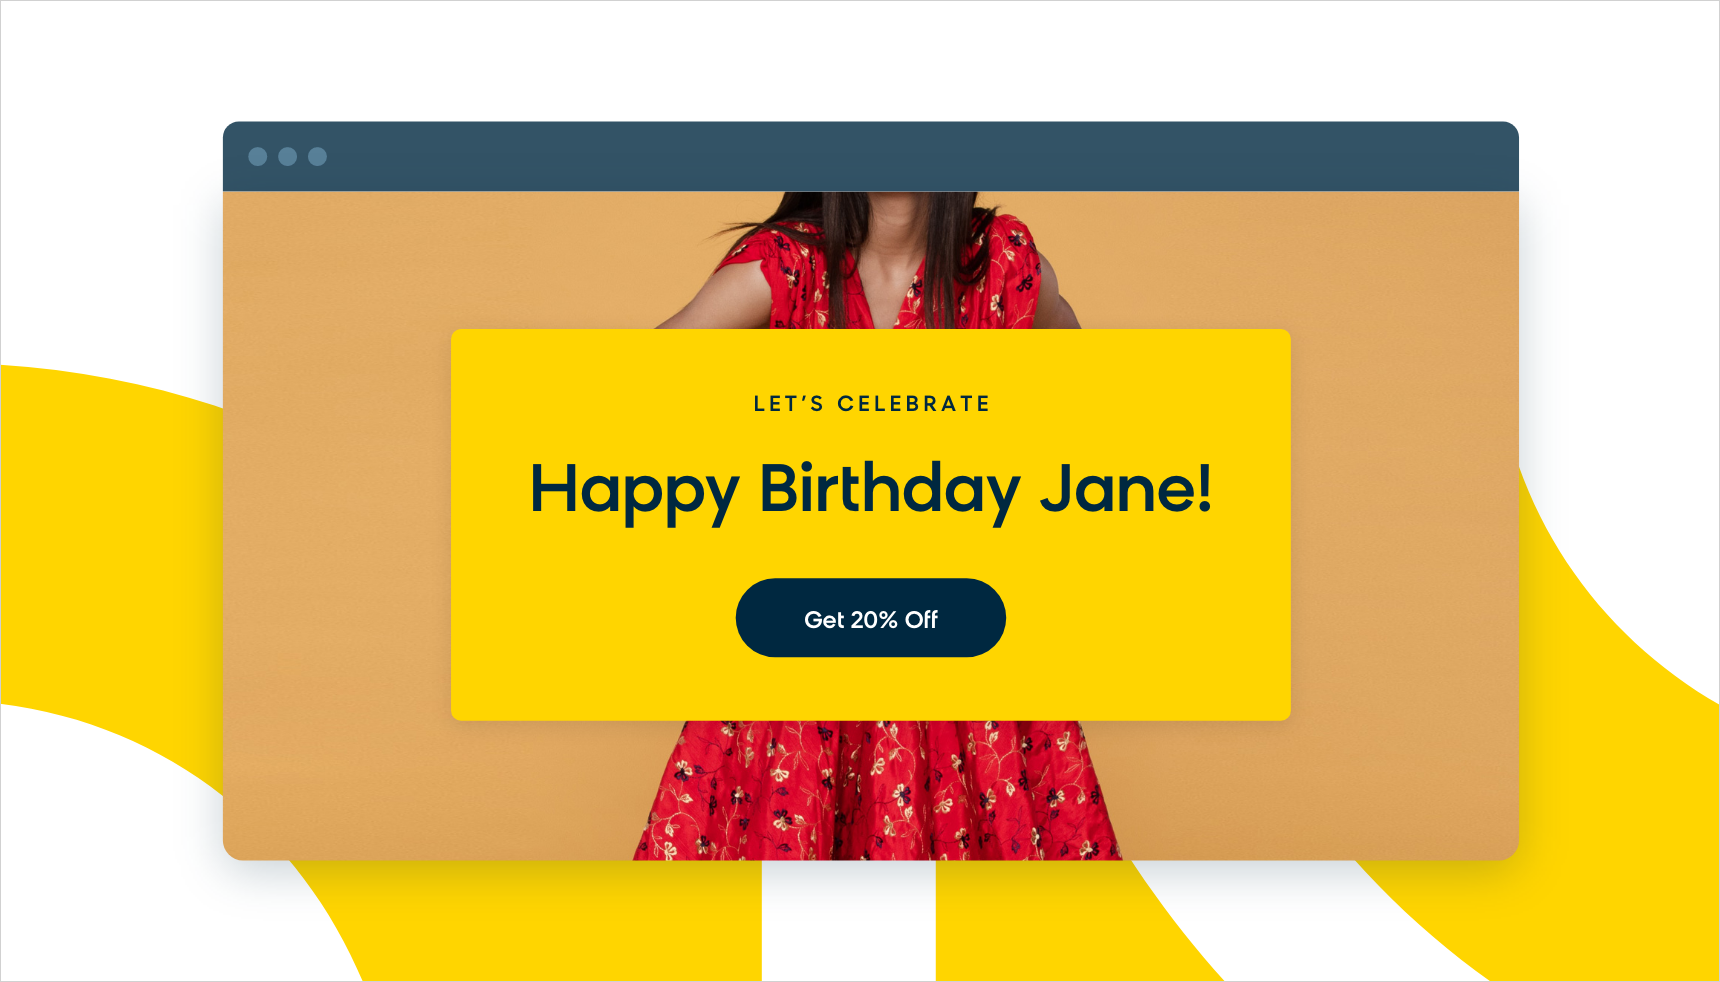 Use your ecommerce marketing automation to send personalized birthday messages to your customers.